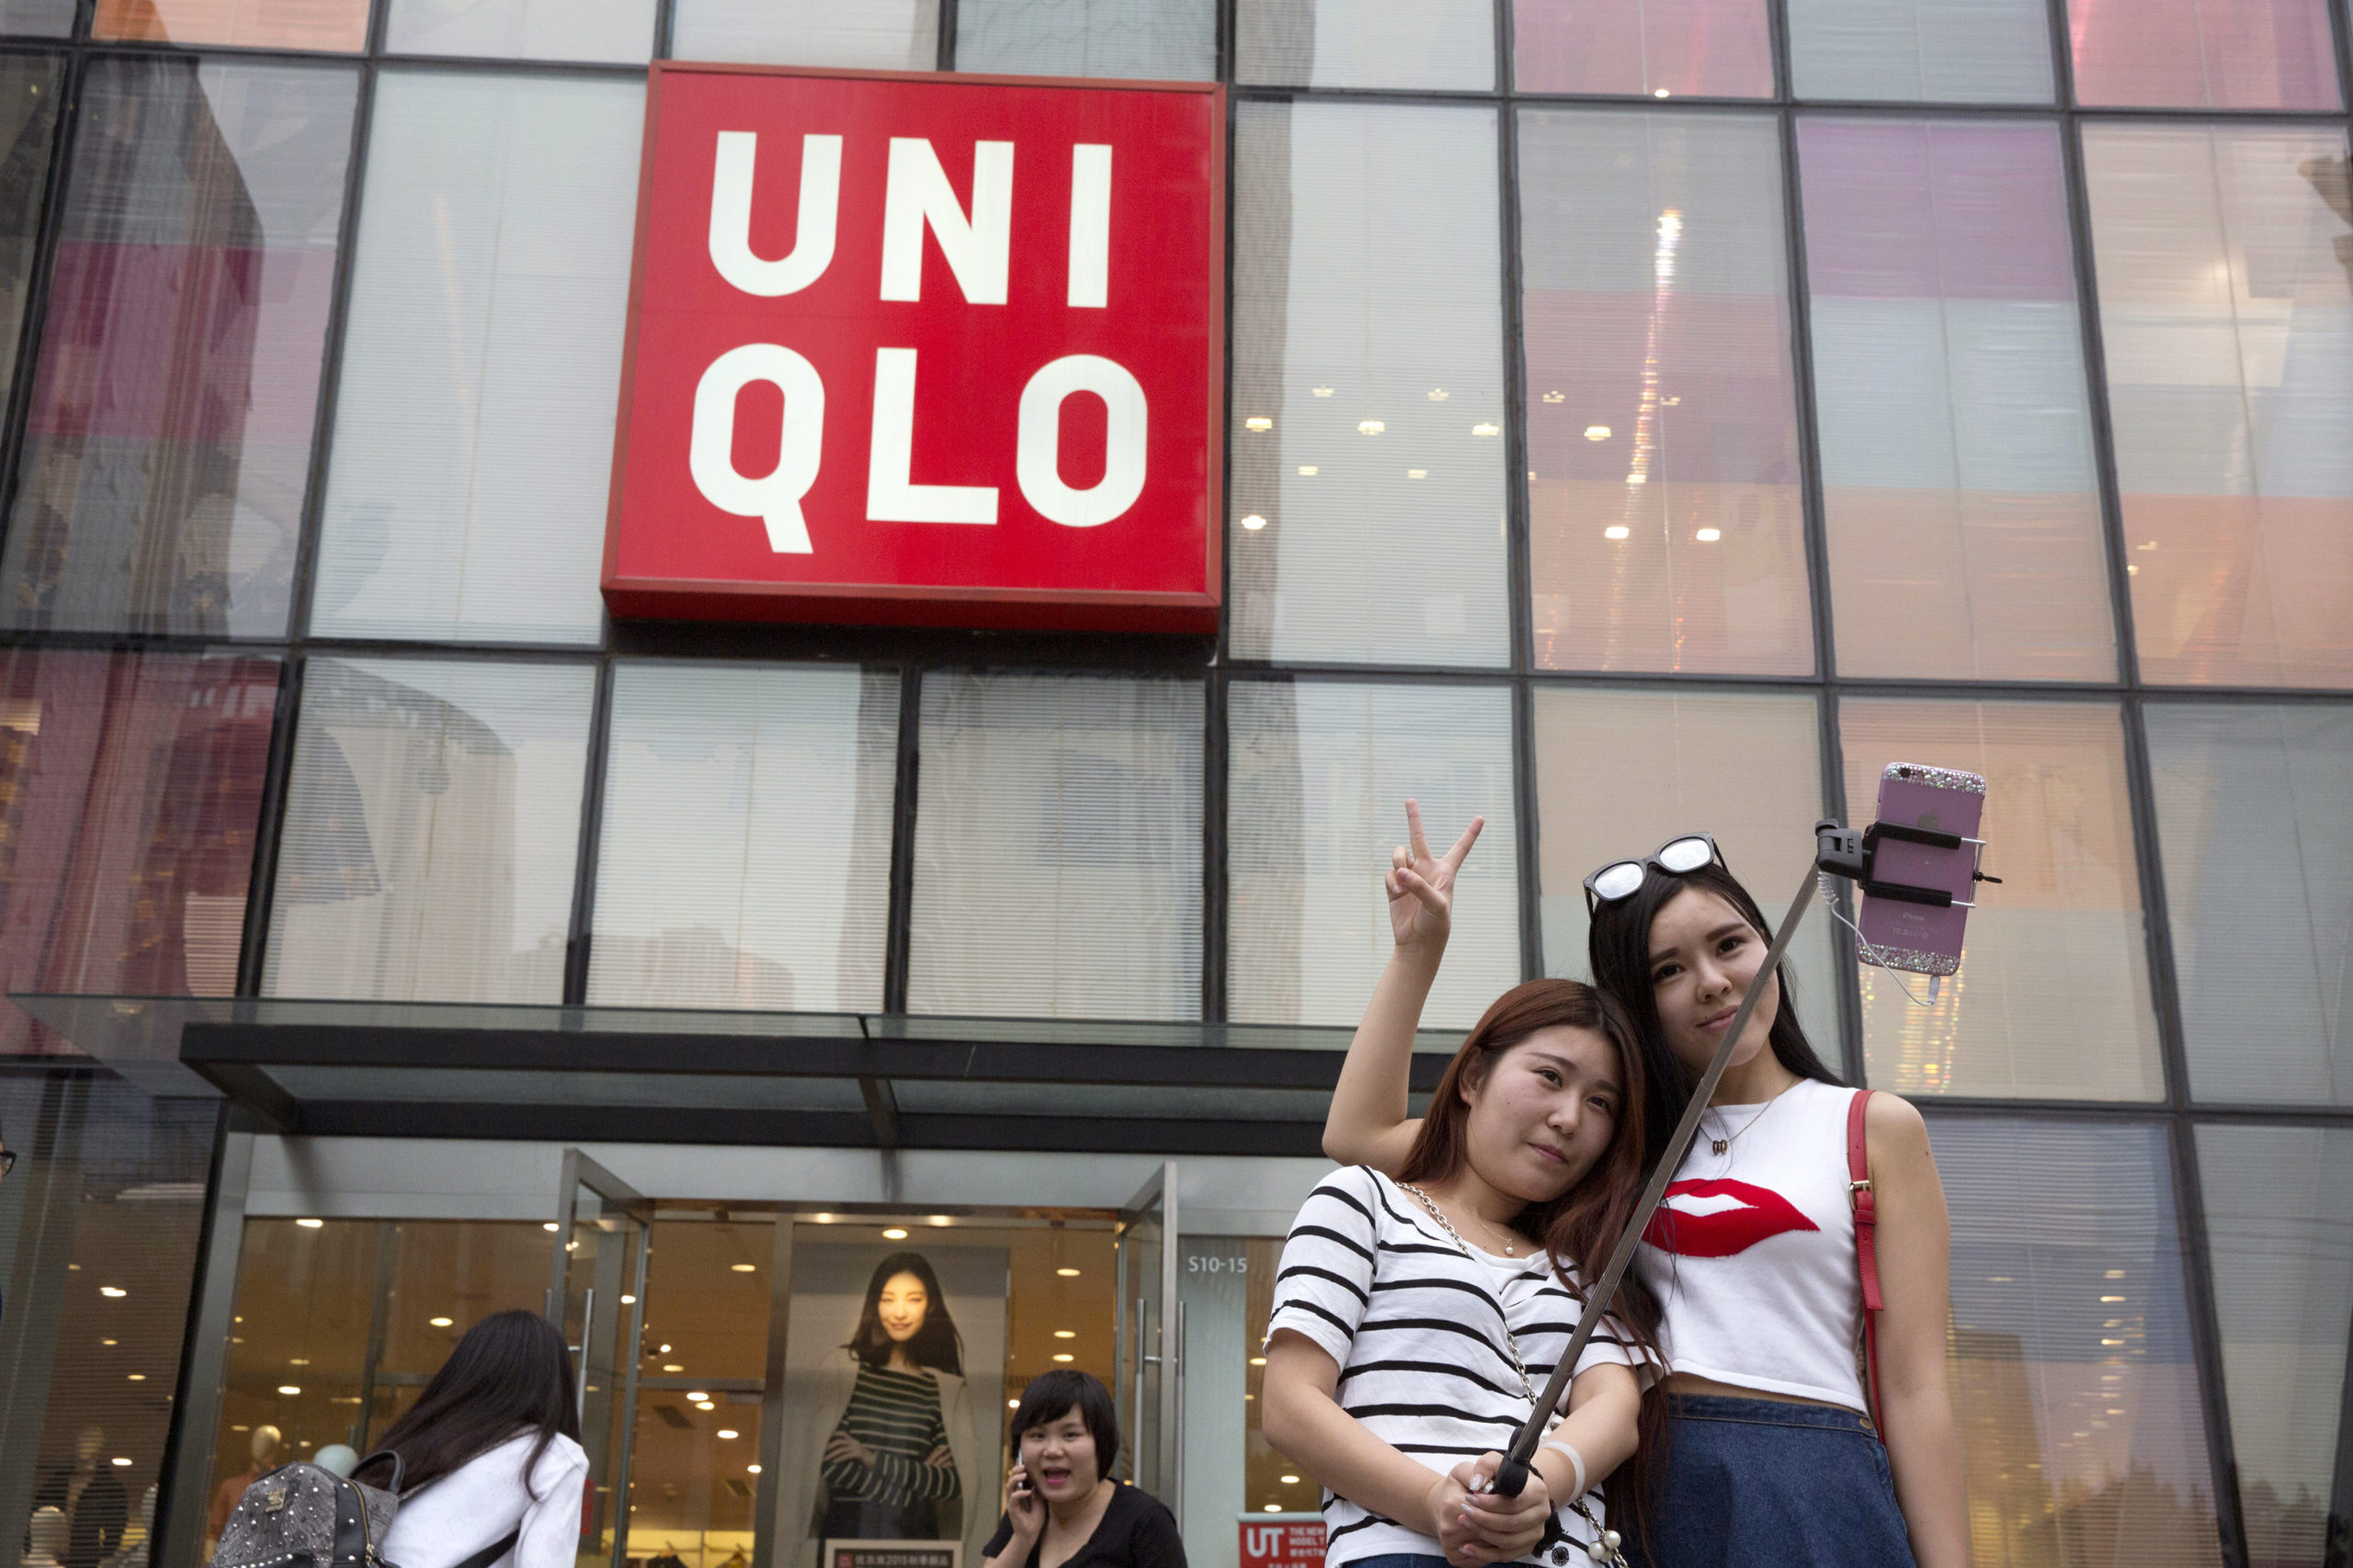 Car makers adjust to virus outbreak, Uniqlo outlets closed